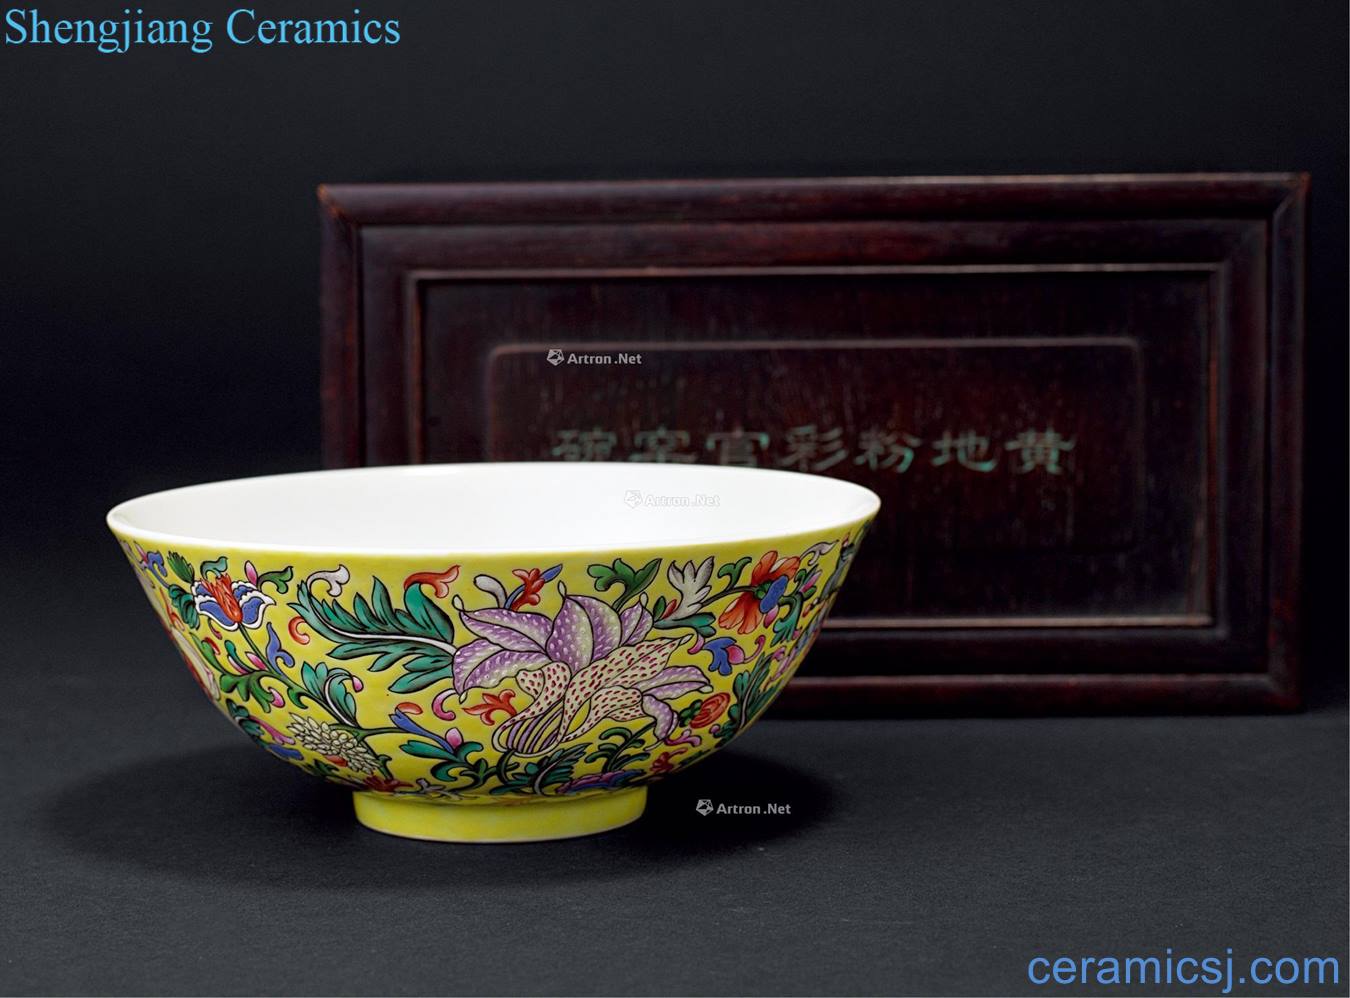 Qianlong to color the flowers yellow grain dishes